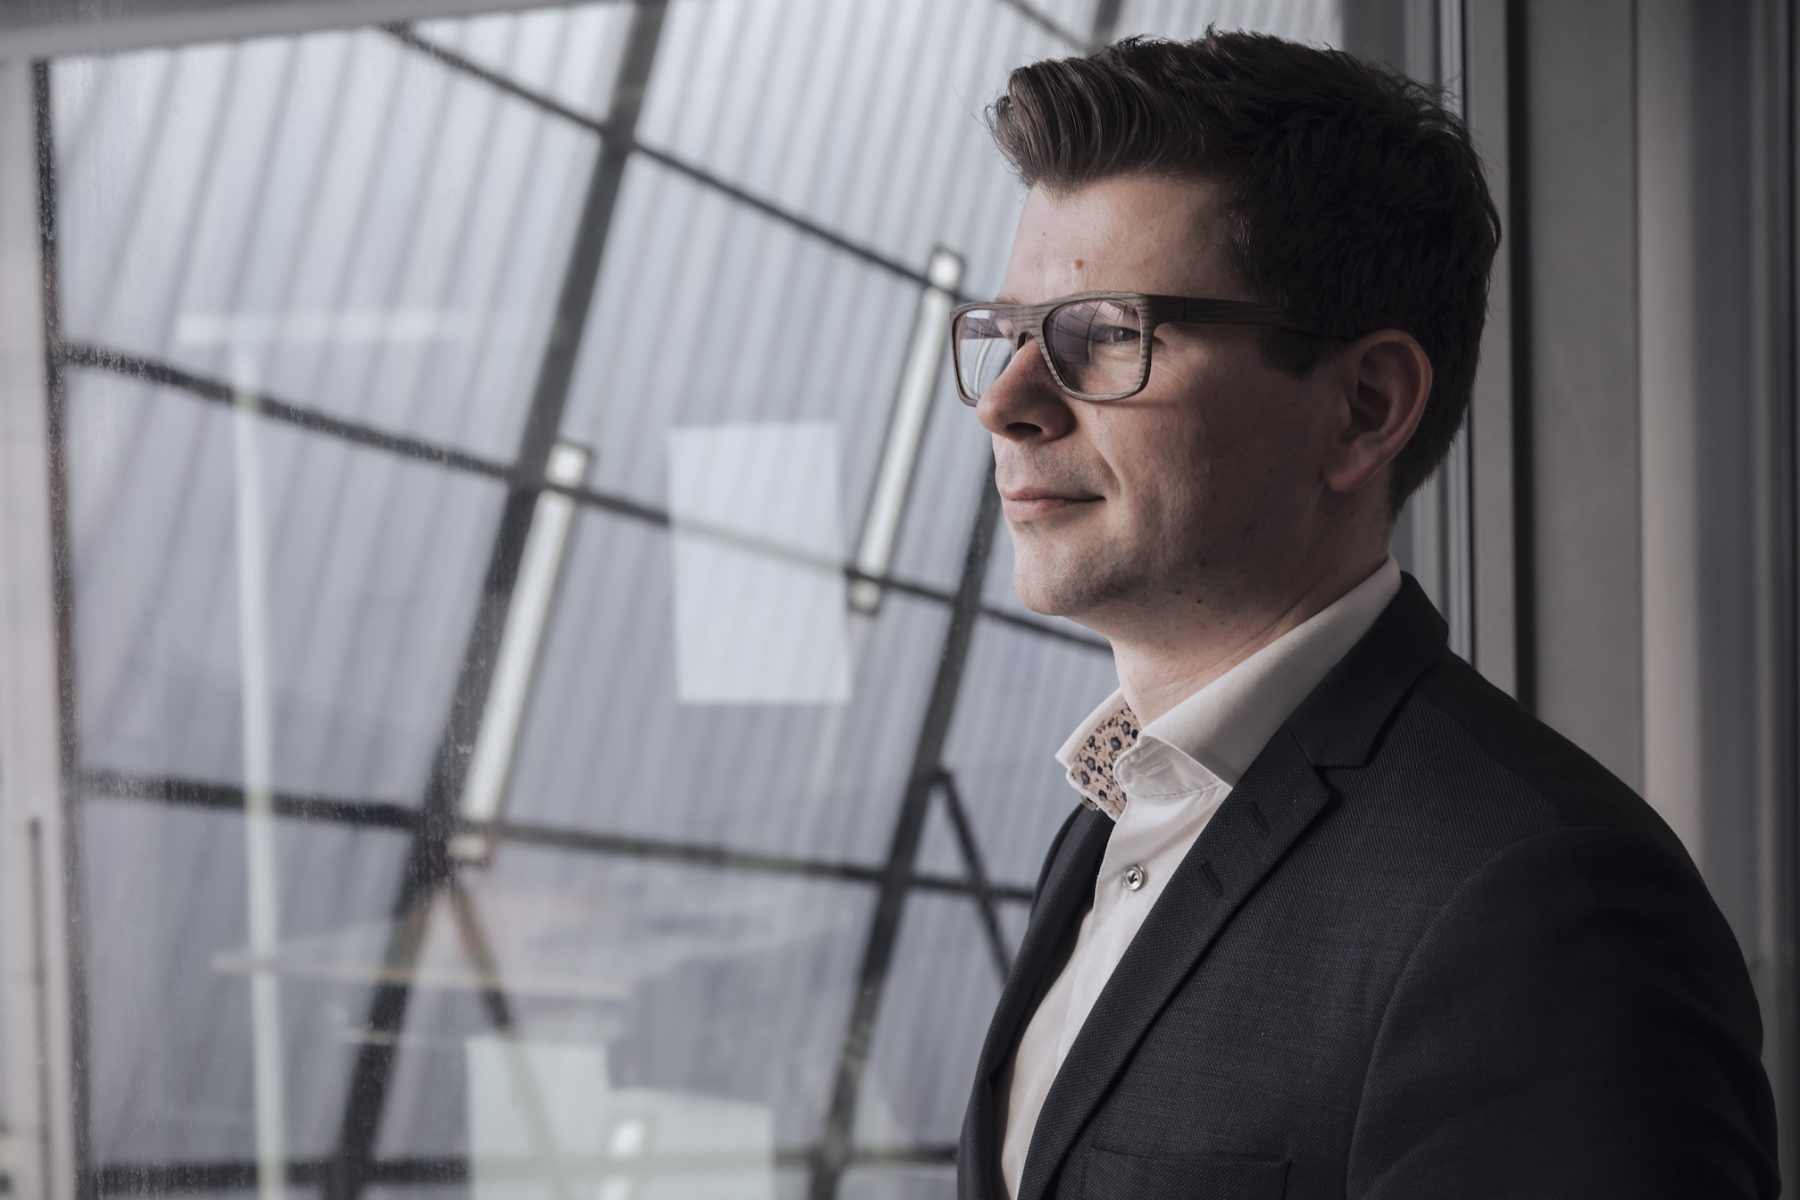 Christoph-Platzer-First 100 Days as CEO-Parkside-Interactive